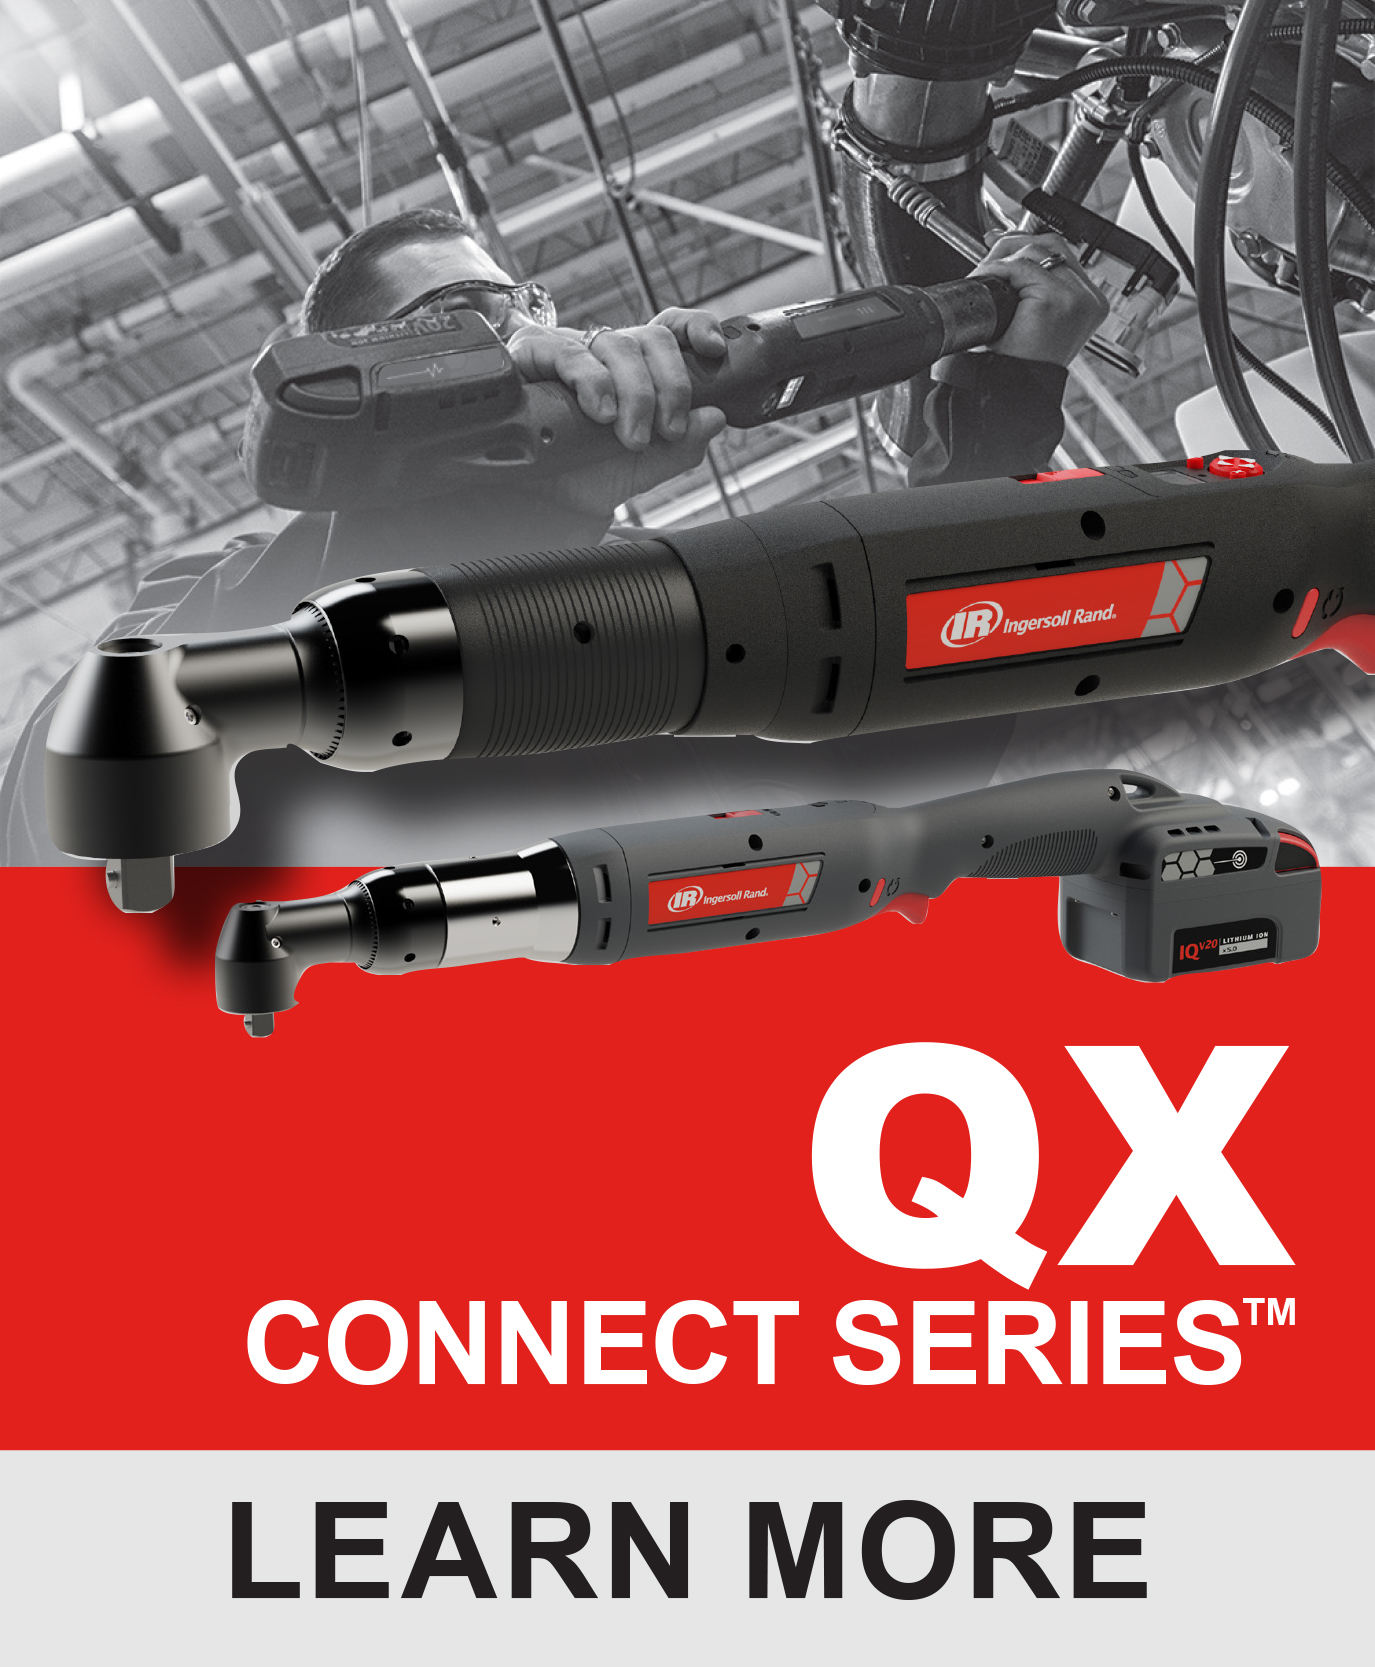 Take total control of your fastening process today with QX Connect Series power tools